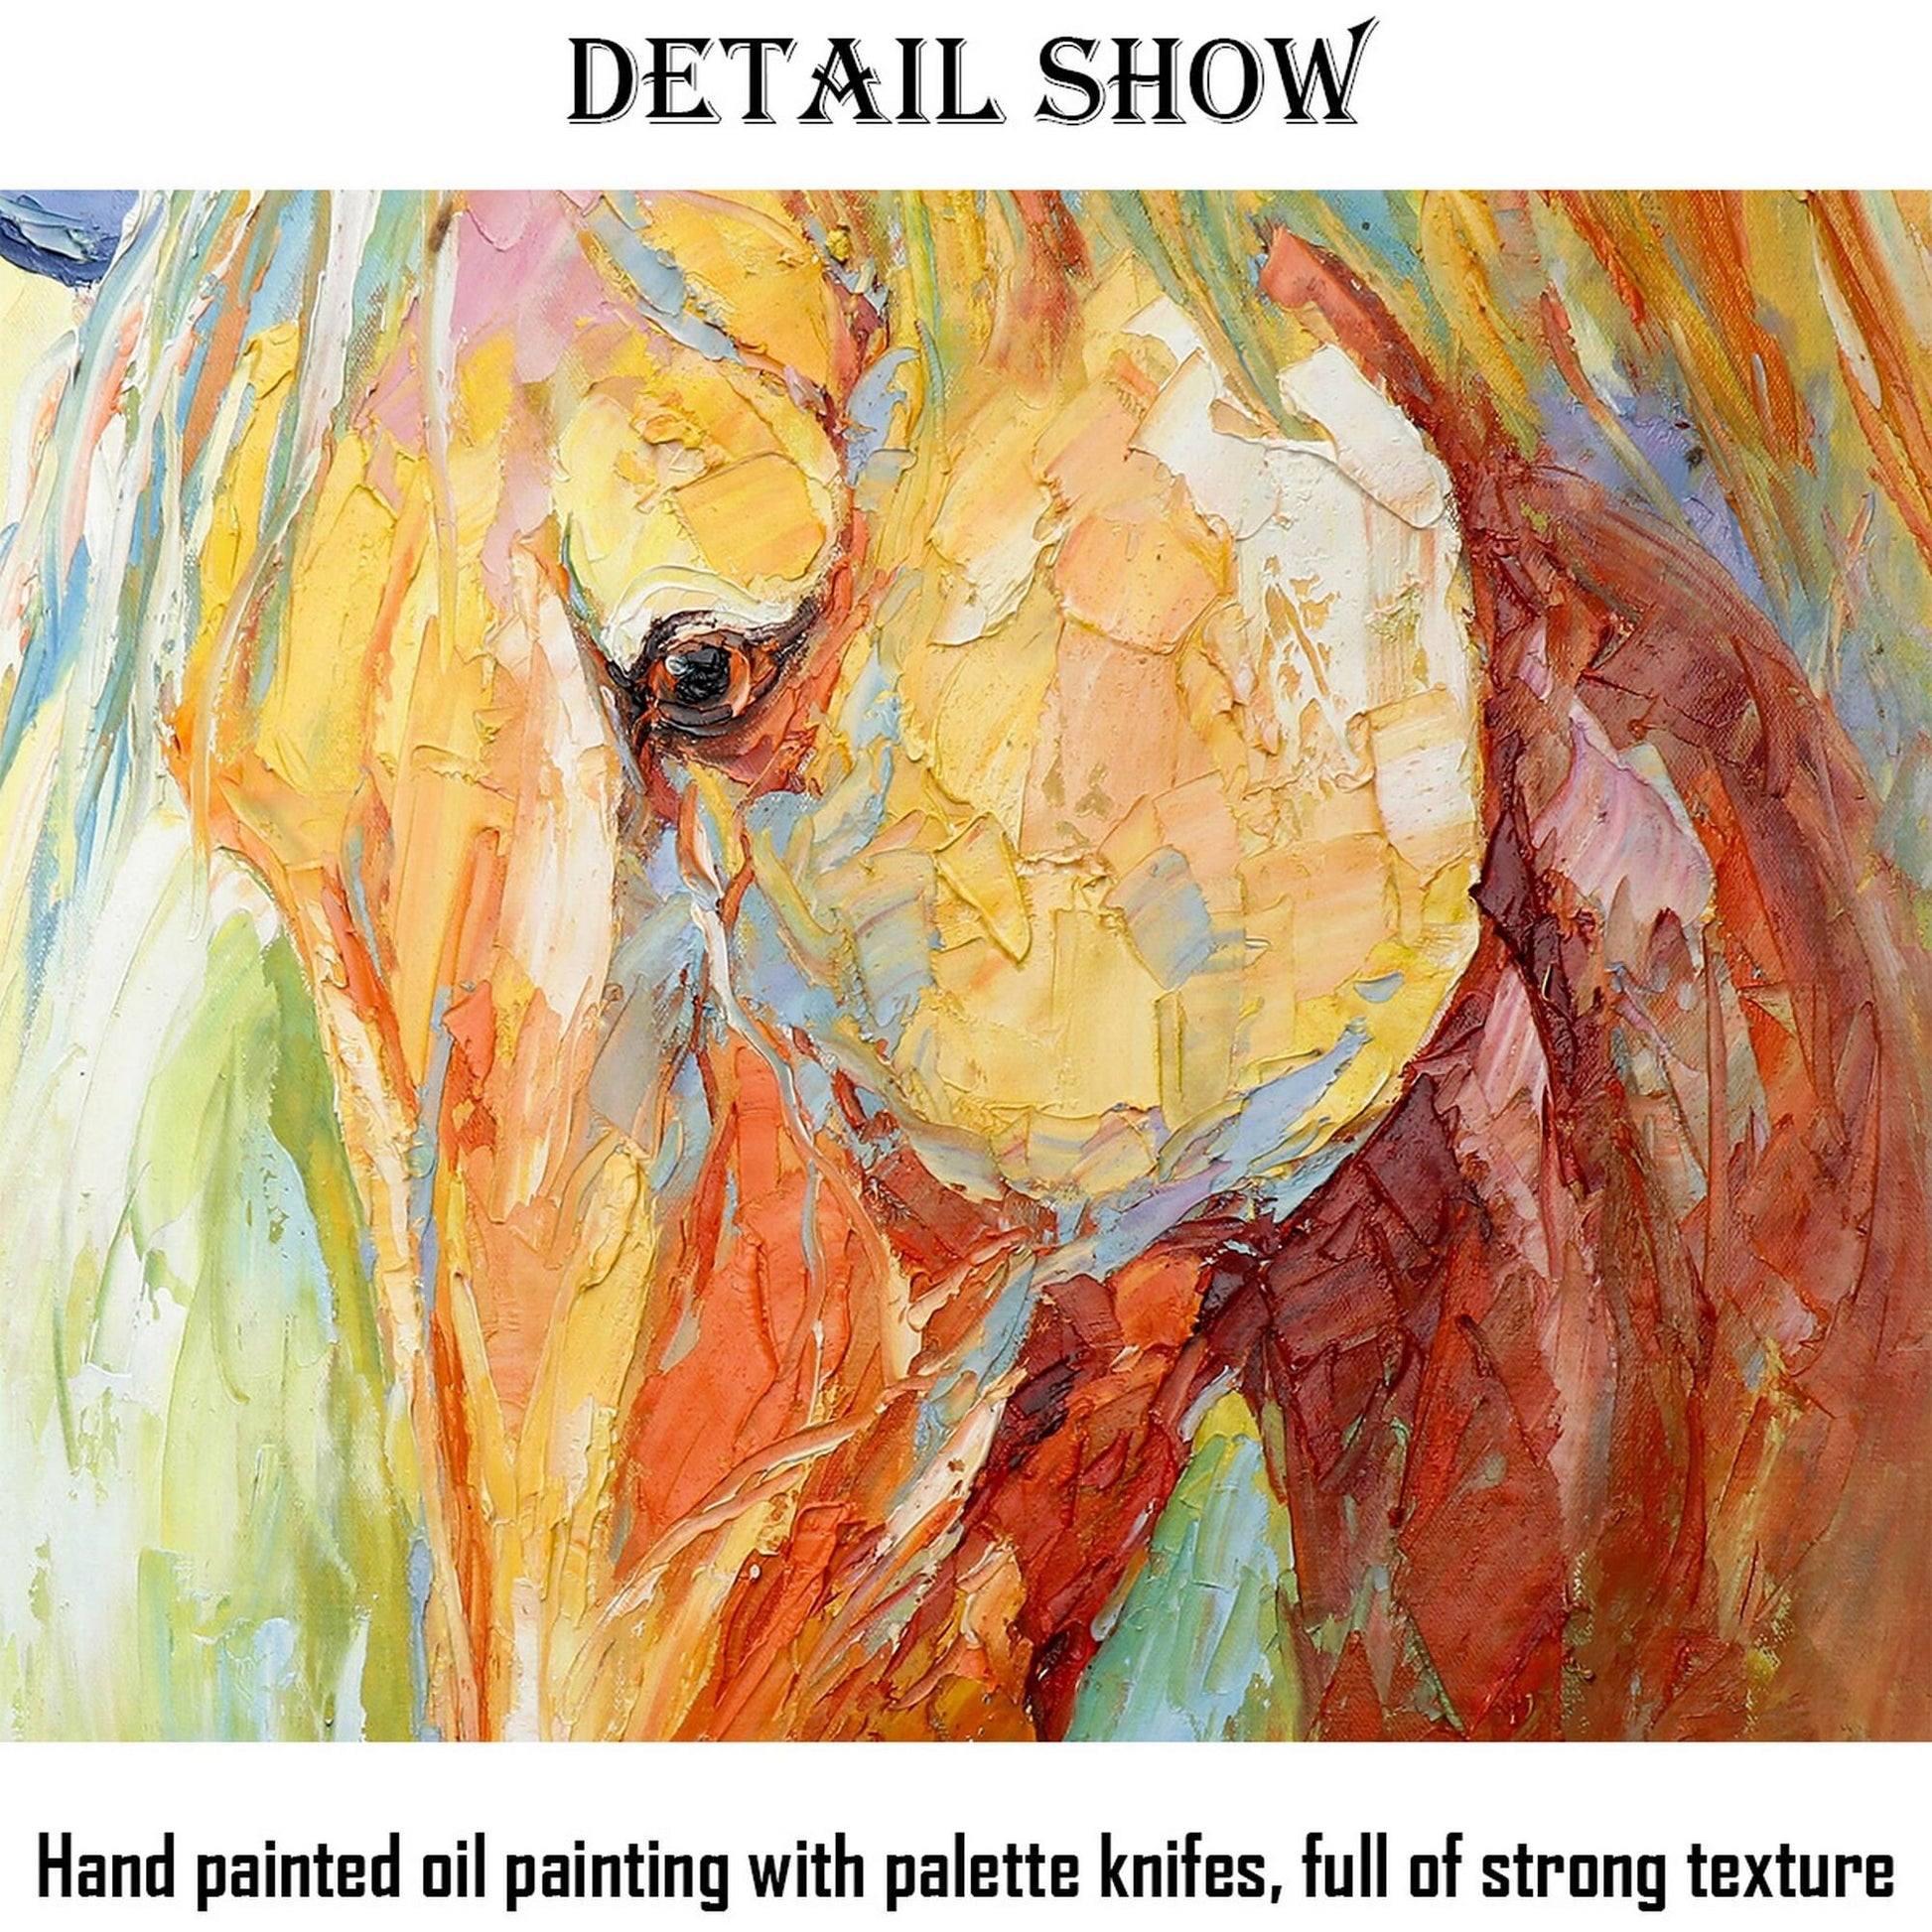 Large Oil Painting Horse Portrait, Living Room Decor, Oil Painting Abstract, Large Canvas Painting, Wall Decor, Modern Painting, Horse Art